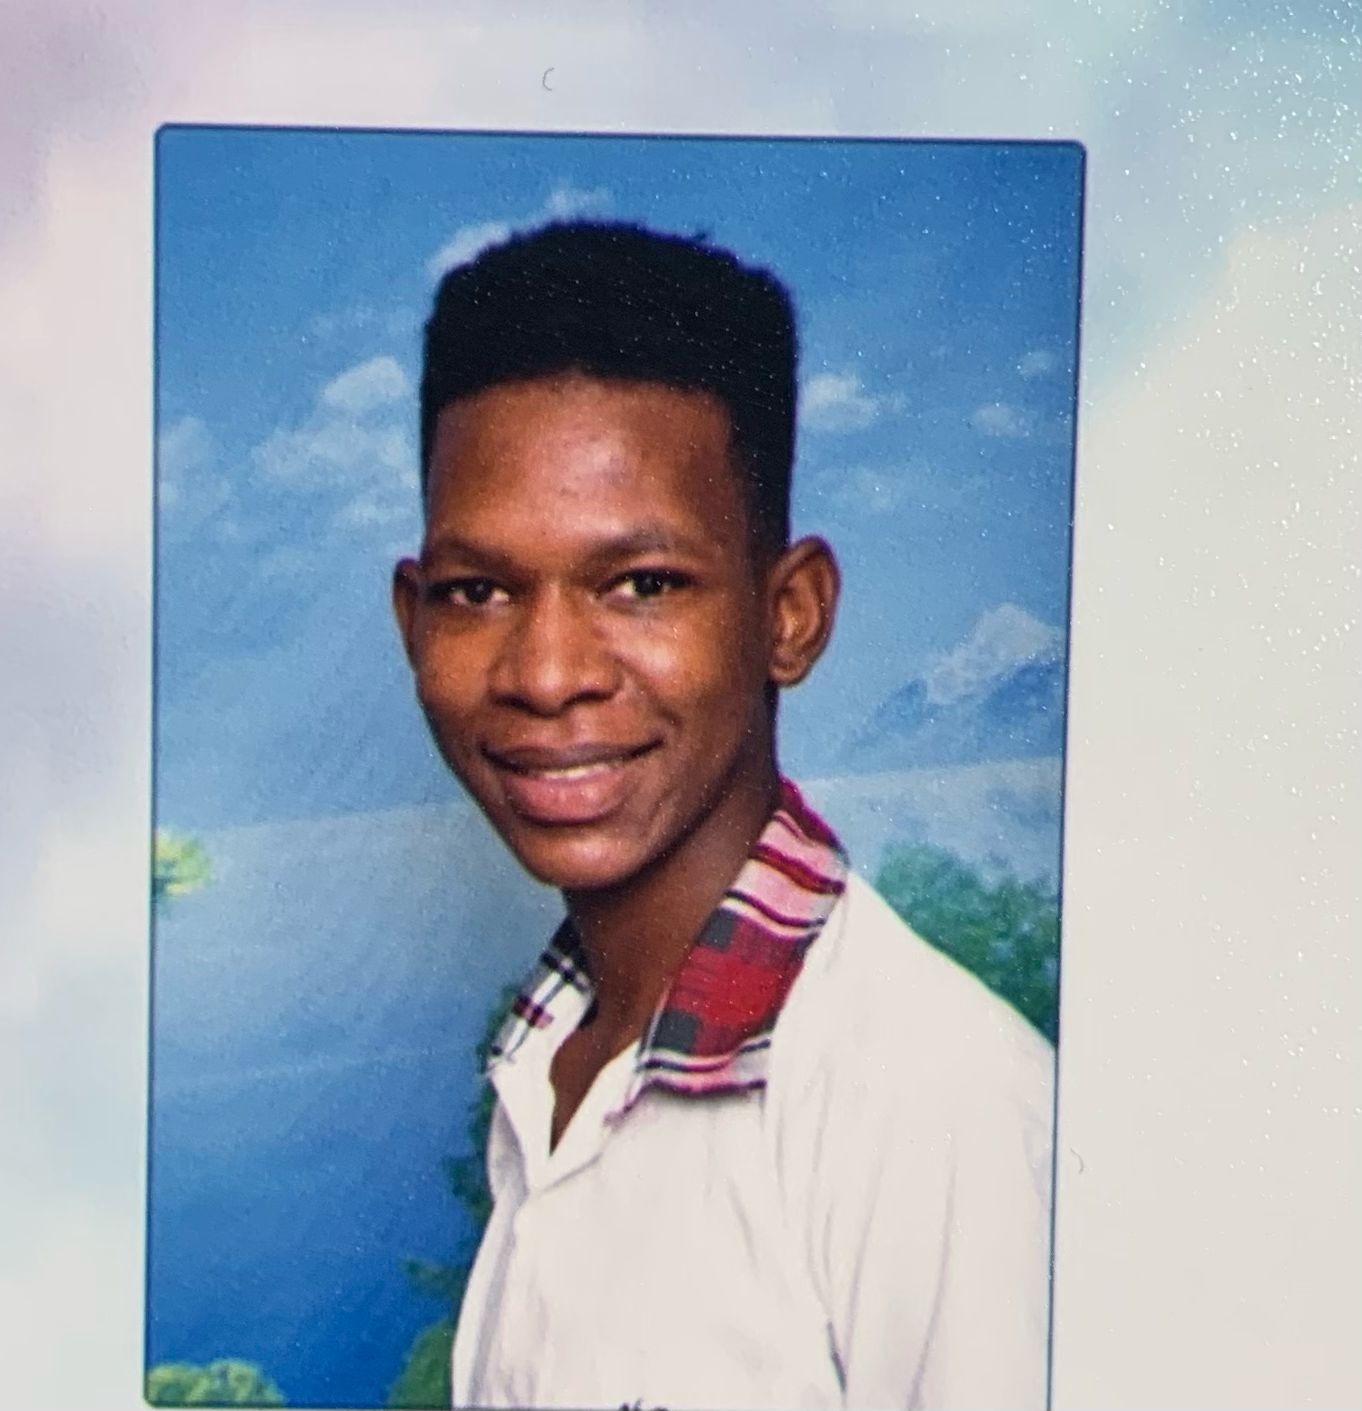 Mokopane Police require police assistance in locating a missing teen